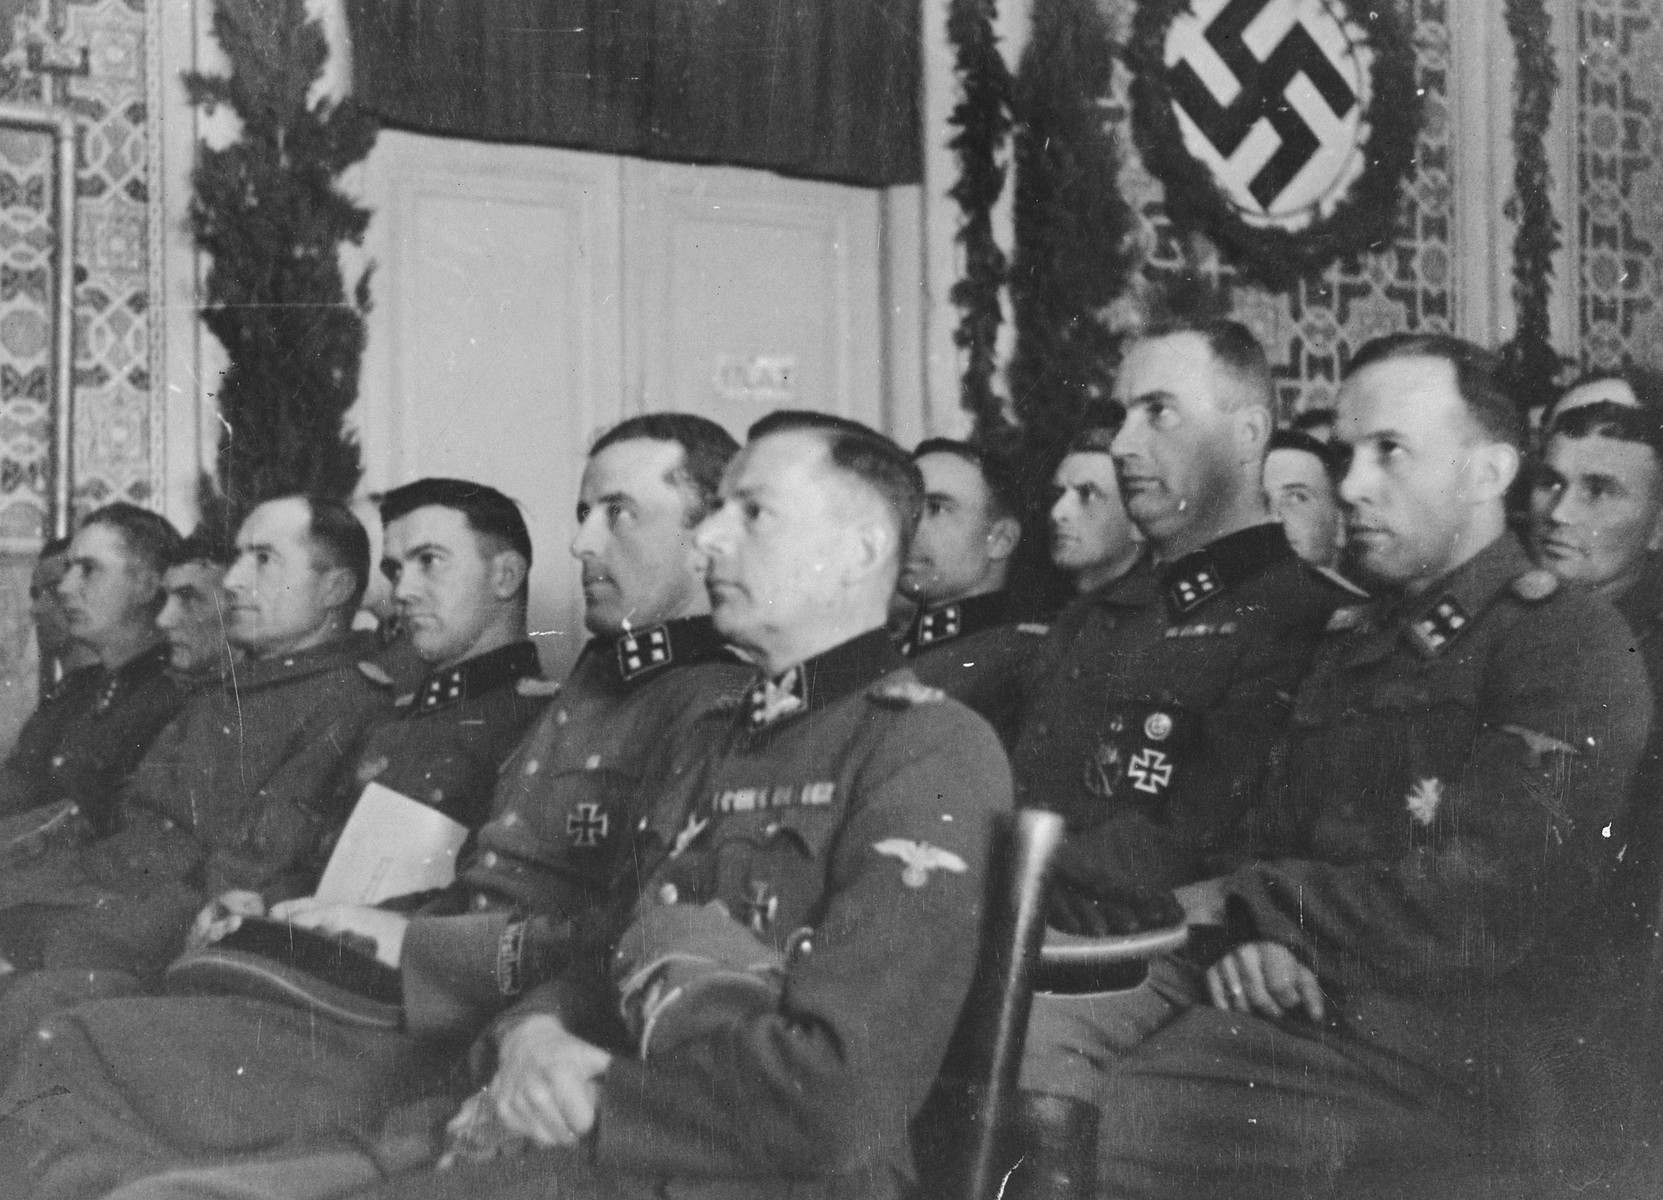 A SS leaders attend a conference in Mostar.

Seated in the first row from right to left are SS-Obergruppenfuehrer Krueger, SS-Sturmbannfuehrer Eberhardt, SS-Sturmbannfuehrer Moreth, SS-Sturmbannfuehrer Hahn. 

The original Waffen-SS caption reads, "Fuehrerbesprechung am 31.1.1944 in Mostar" (leaders' conference on January 31, 1944 in Mostar).

One of a series of photographs taken by the 7th SS Volunteer Mountain Division Prinz Eugen in Croatia, Serbia, and Montenegro from 1942 to 1944, after the German invasion of the Kingdom of Yugoslavia. The photographs are believed to have been captioned by the commanding office of the Waffen-SS, and had been in the possession of  Friedrich Wilhem Krueger, who served with the division from November 1943 until April 1944.